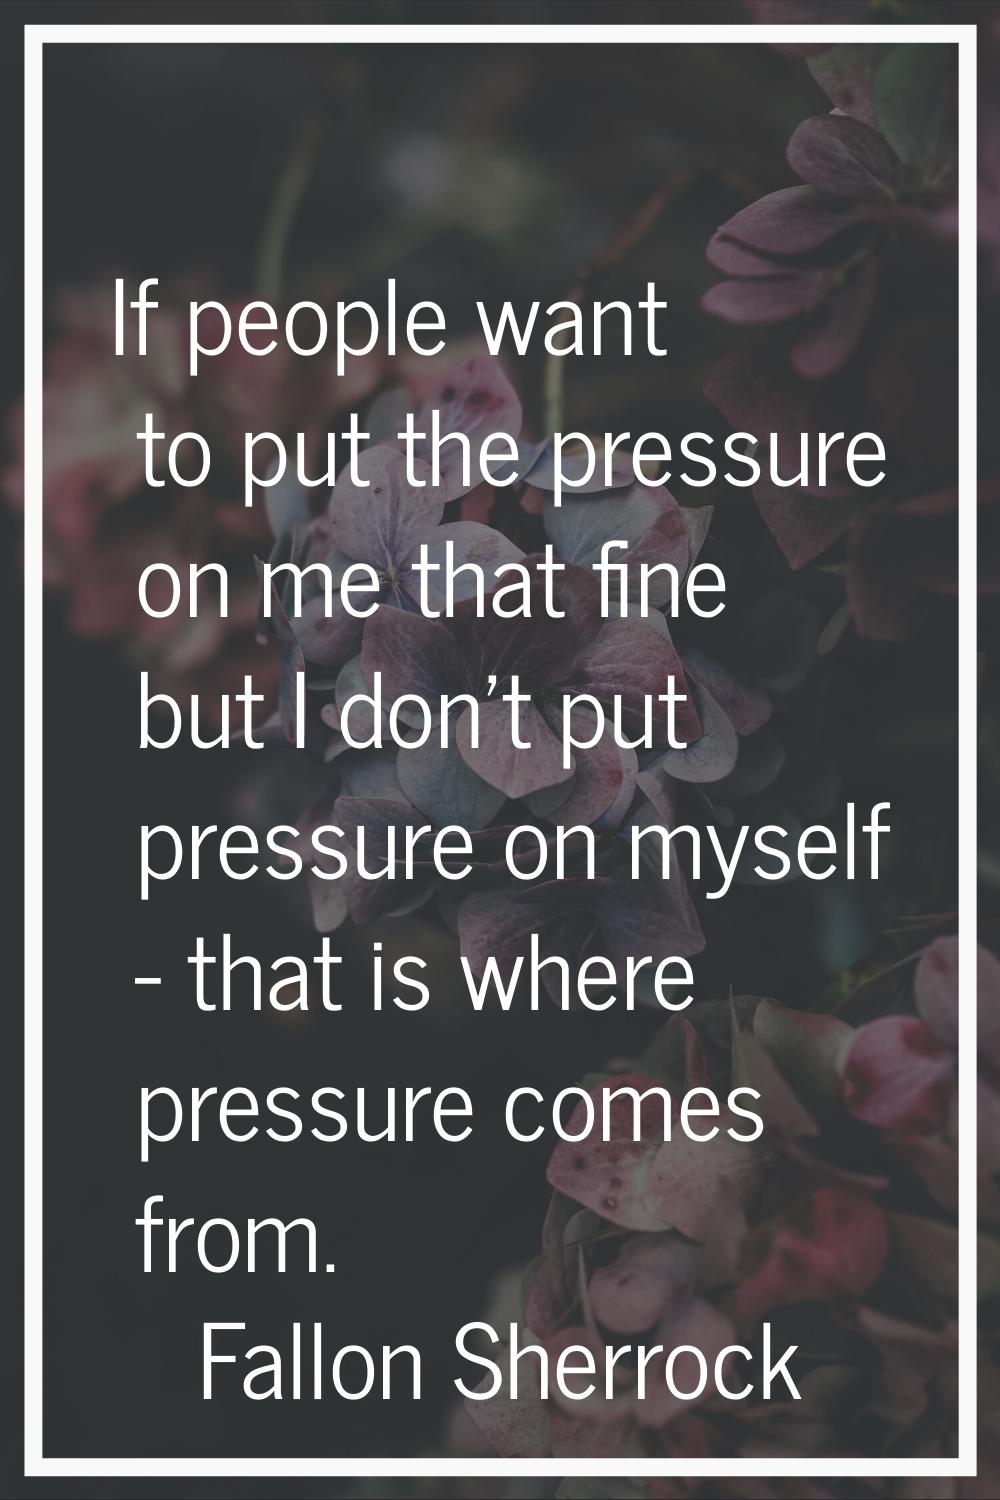 If people want to put the pressure on me that fine but I don't put pressure on myself - that is whe